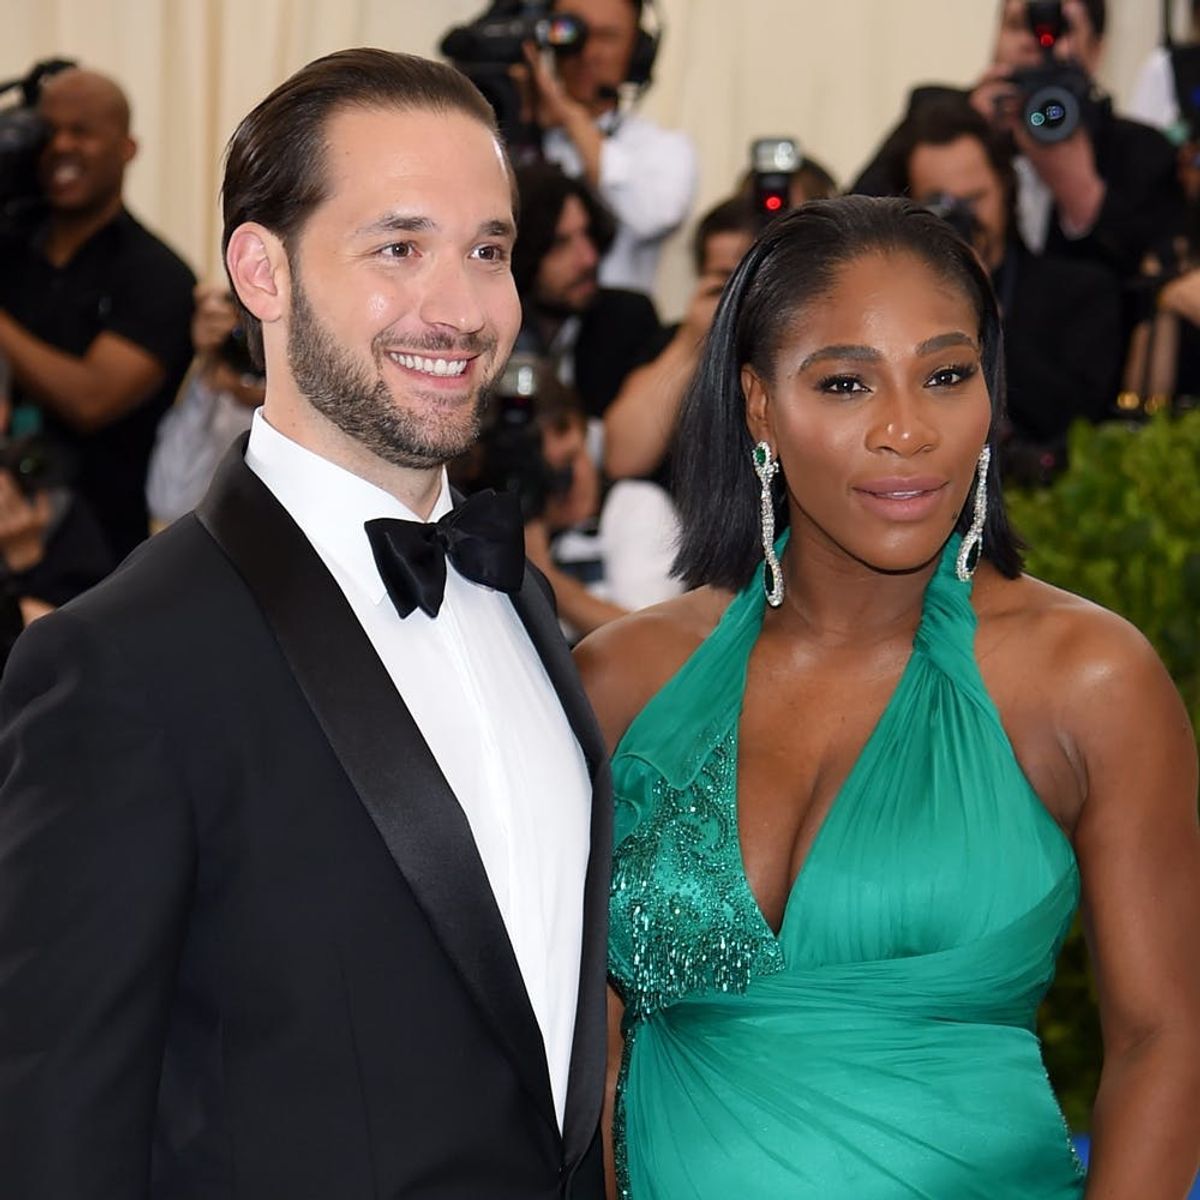 Serena Williams Shares the First Photo of Her Baby Daughter — Plus, Find Out Her Name!